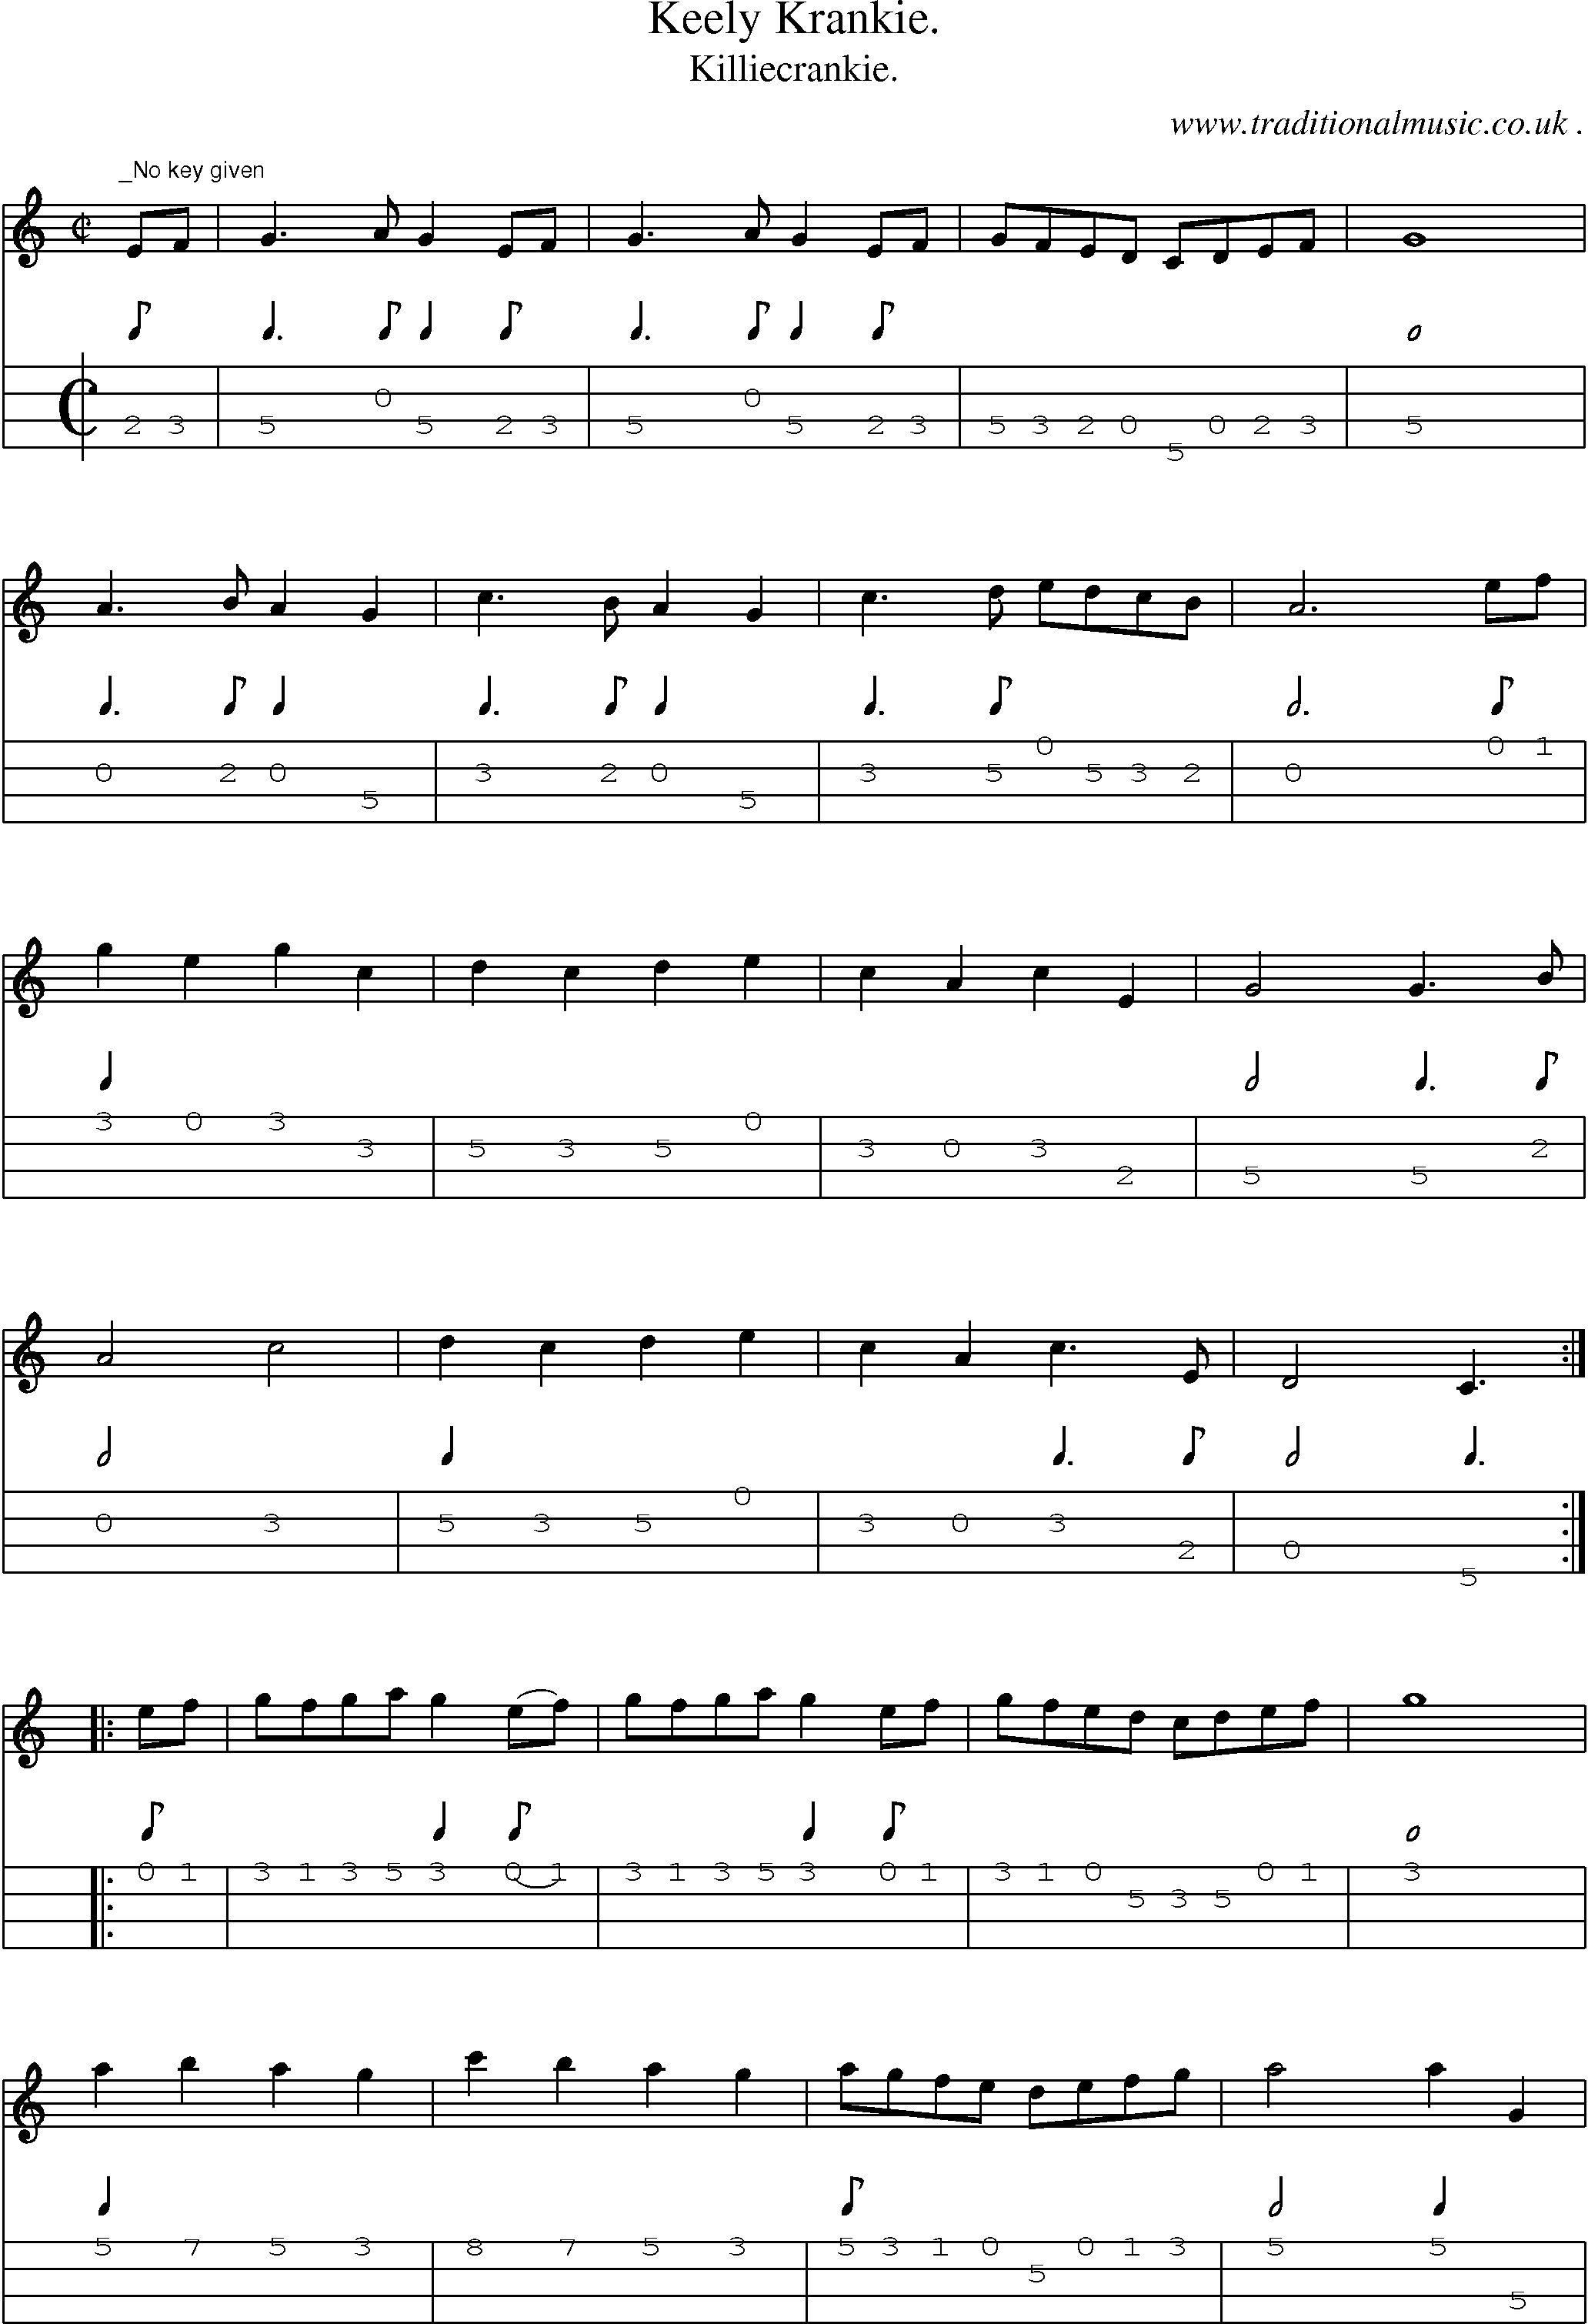 Sheet-Music and Mandolin Tabs for Keely Krankie